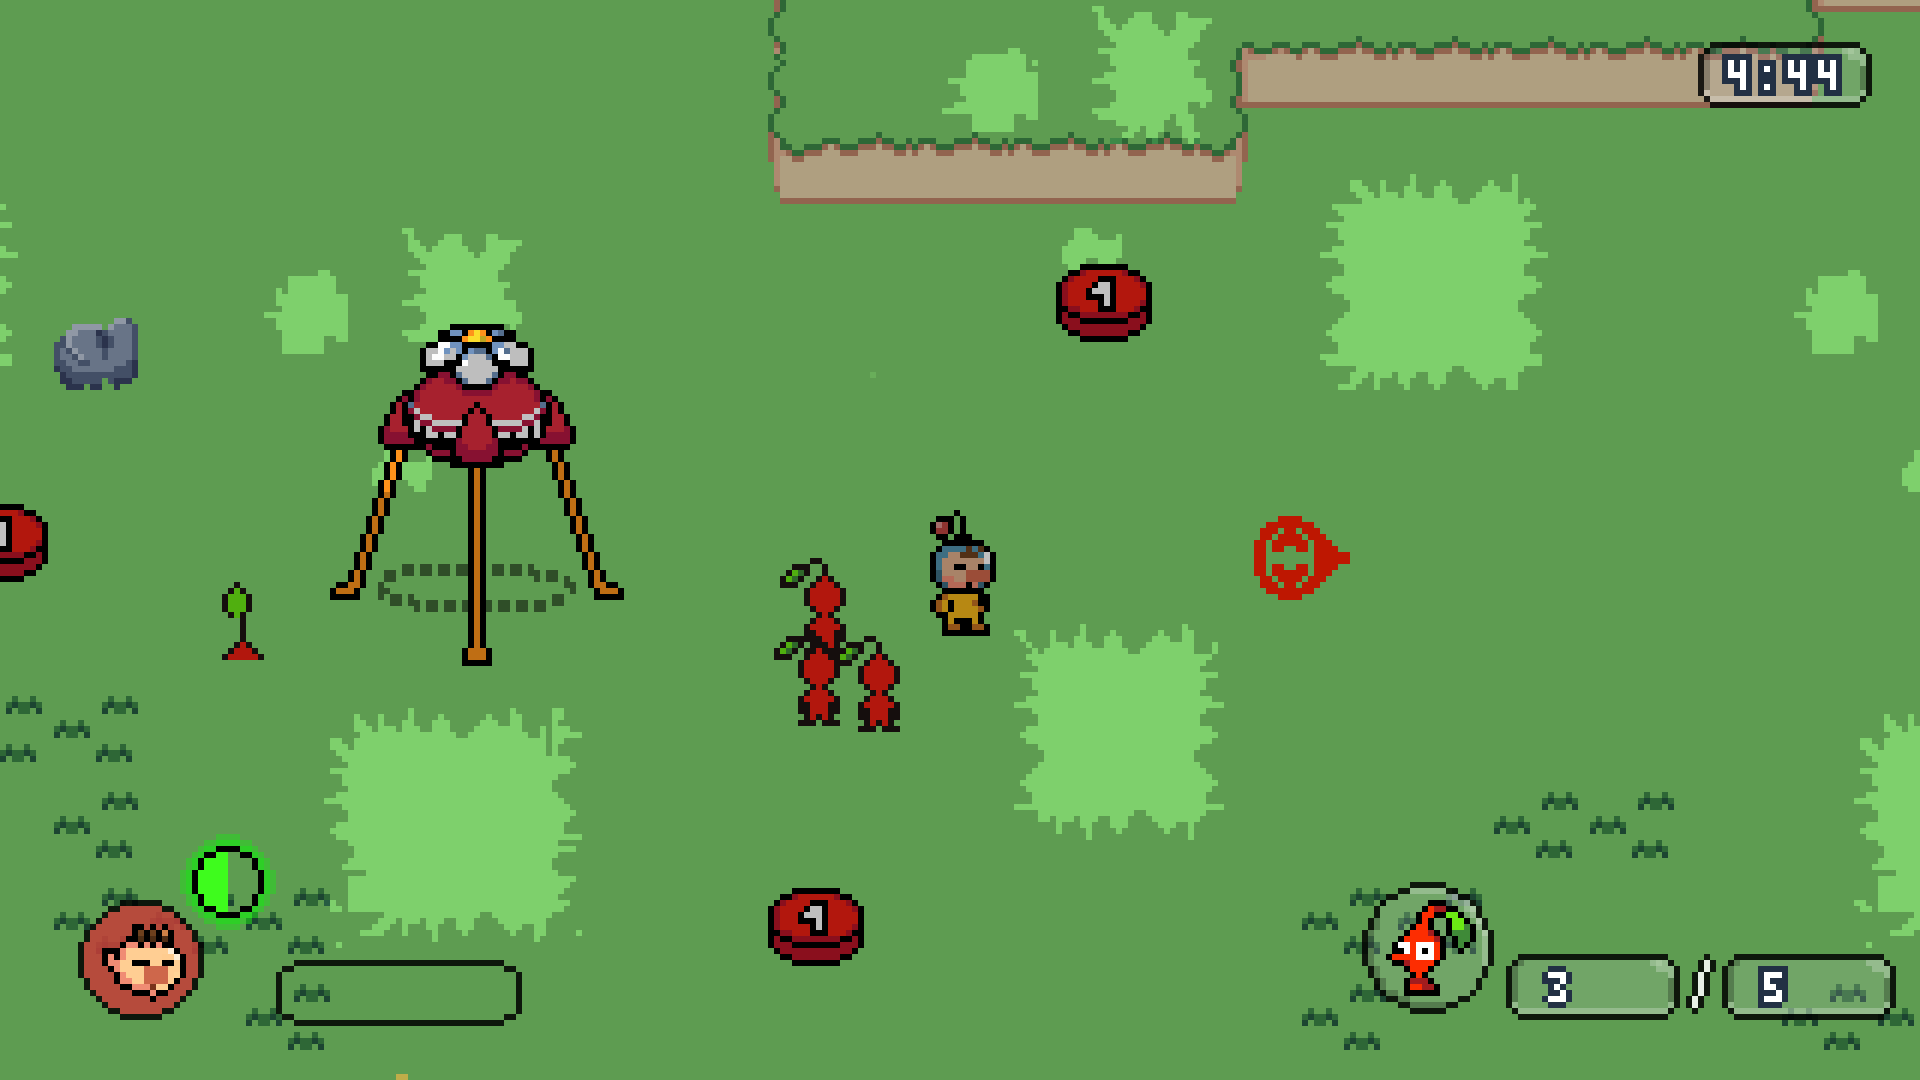 A Pikmin Fangame - Free Addicting Game